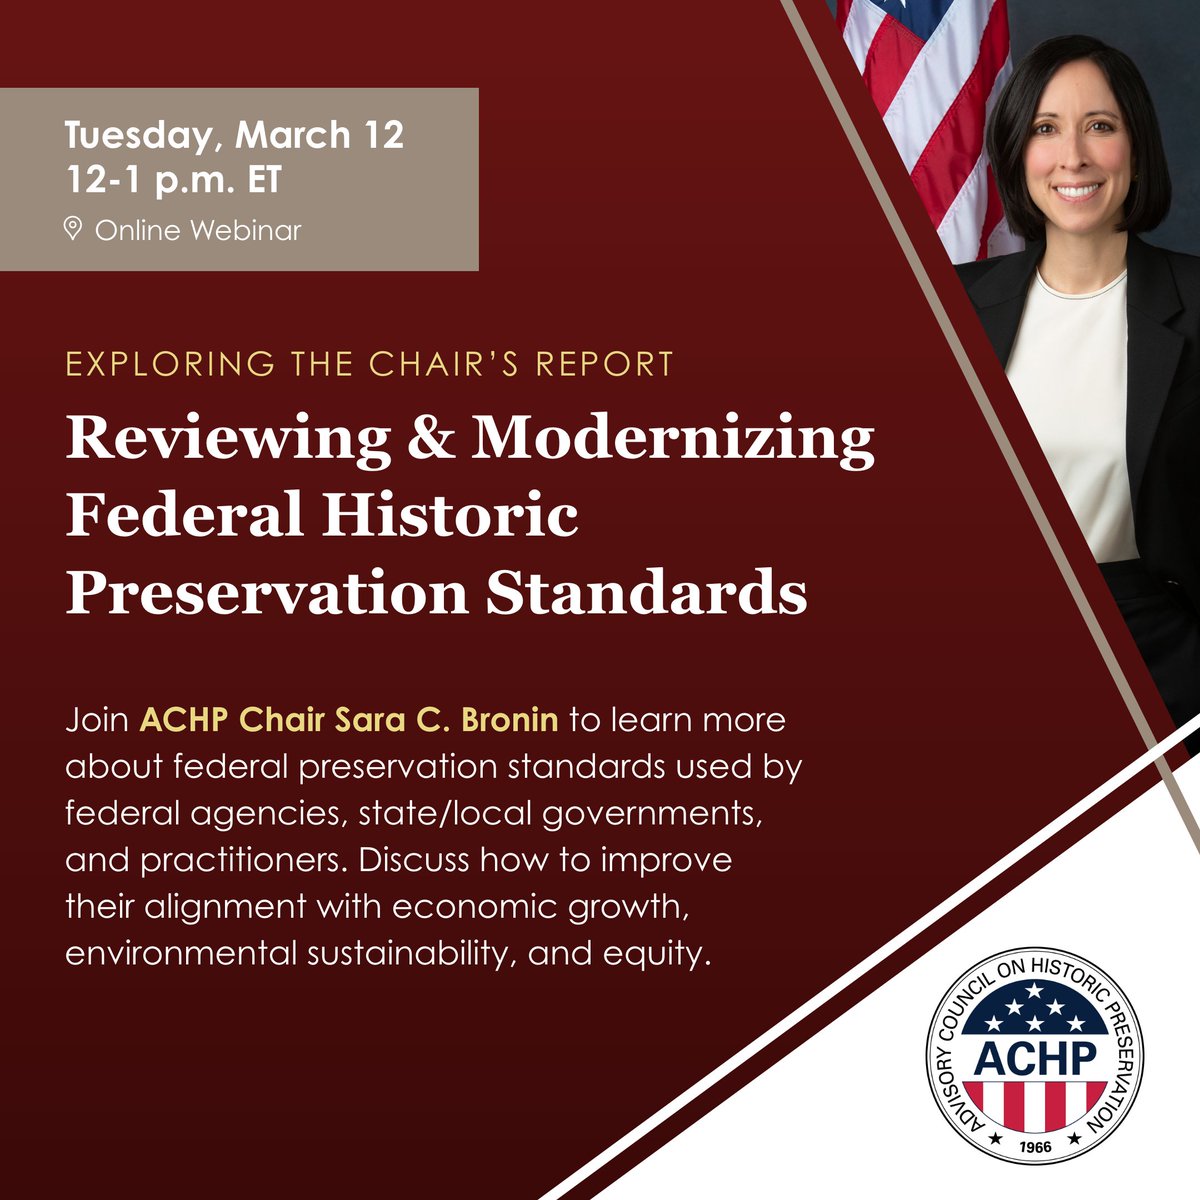 Join @ChairBronin virtually 12 – 1 p.m. ET Tues. 3/12 for Exploring the Chair’s Report: Reviewing and Modernizing Federal Historic Preservation Standards after releasing her Report and Recommendations on Federal Historic Preservation Standards last week achp.zoomgov.com/webinar/regist…